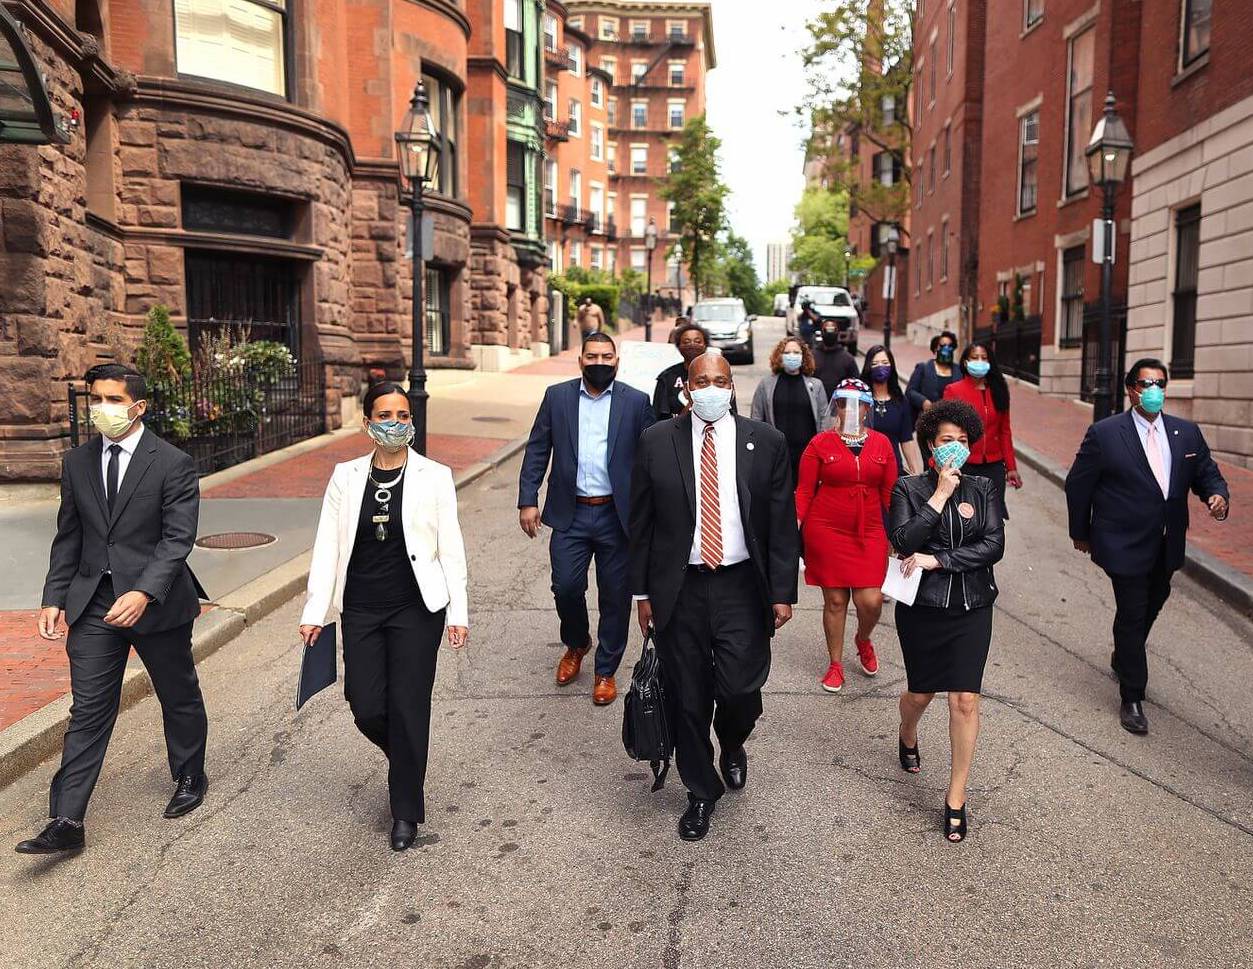 A group of state and local representatives walking in downtown Boston with masks.